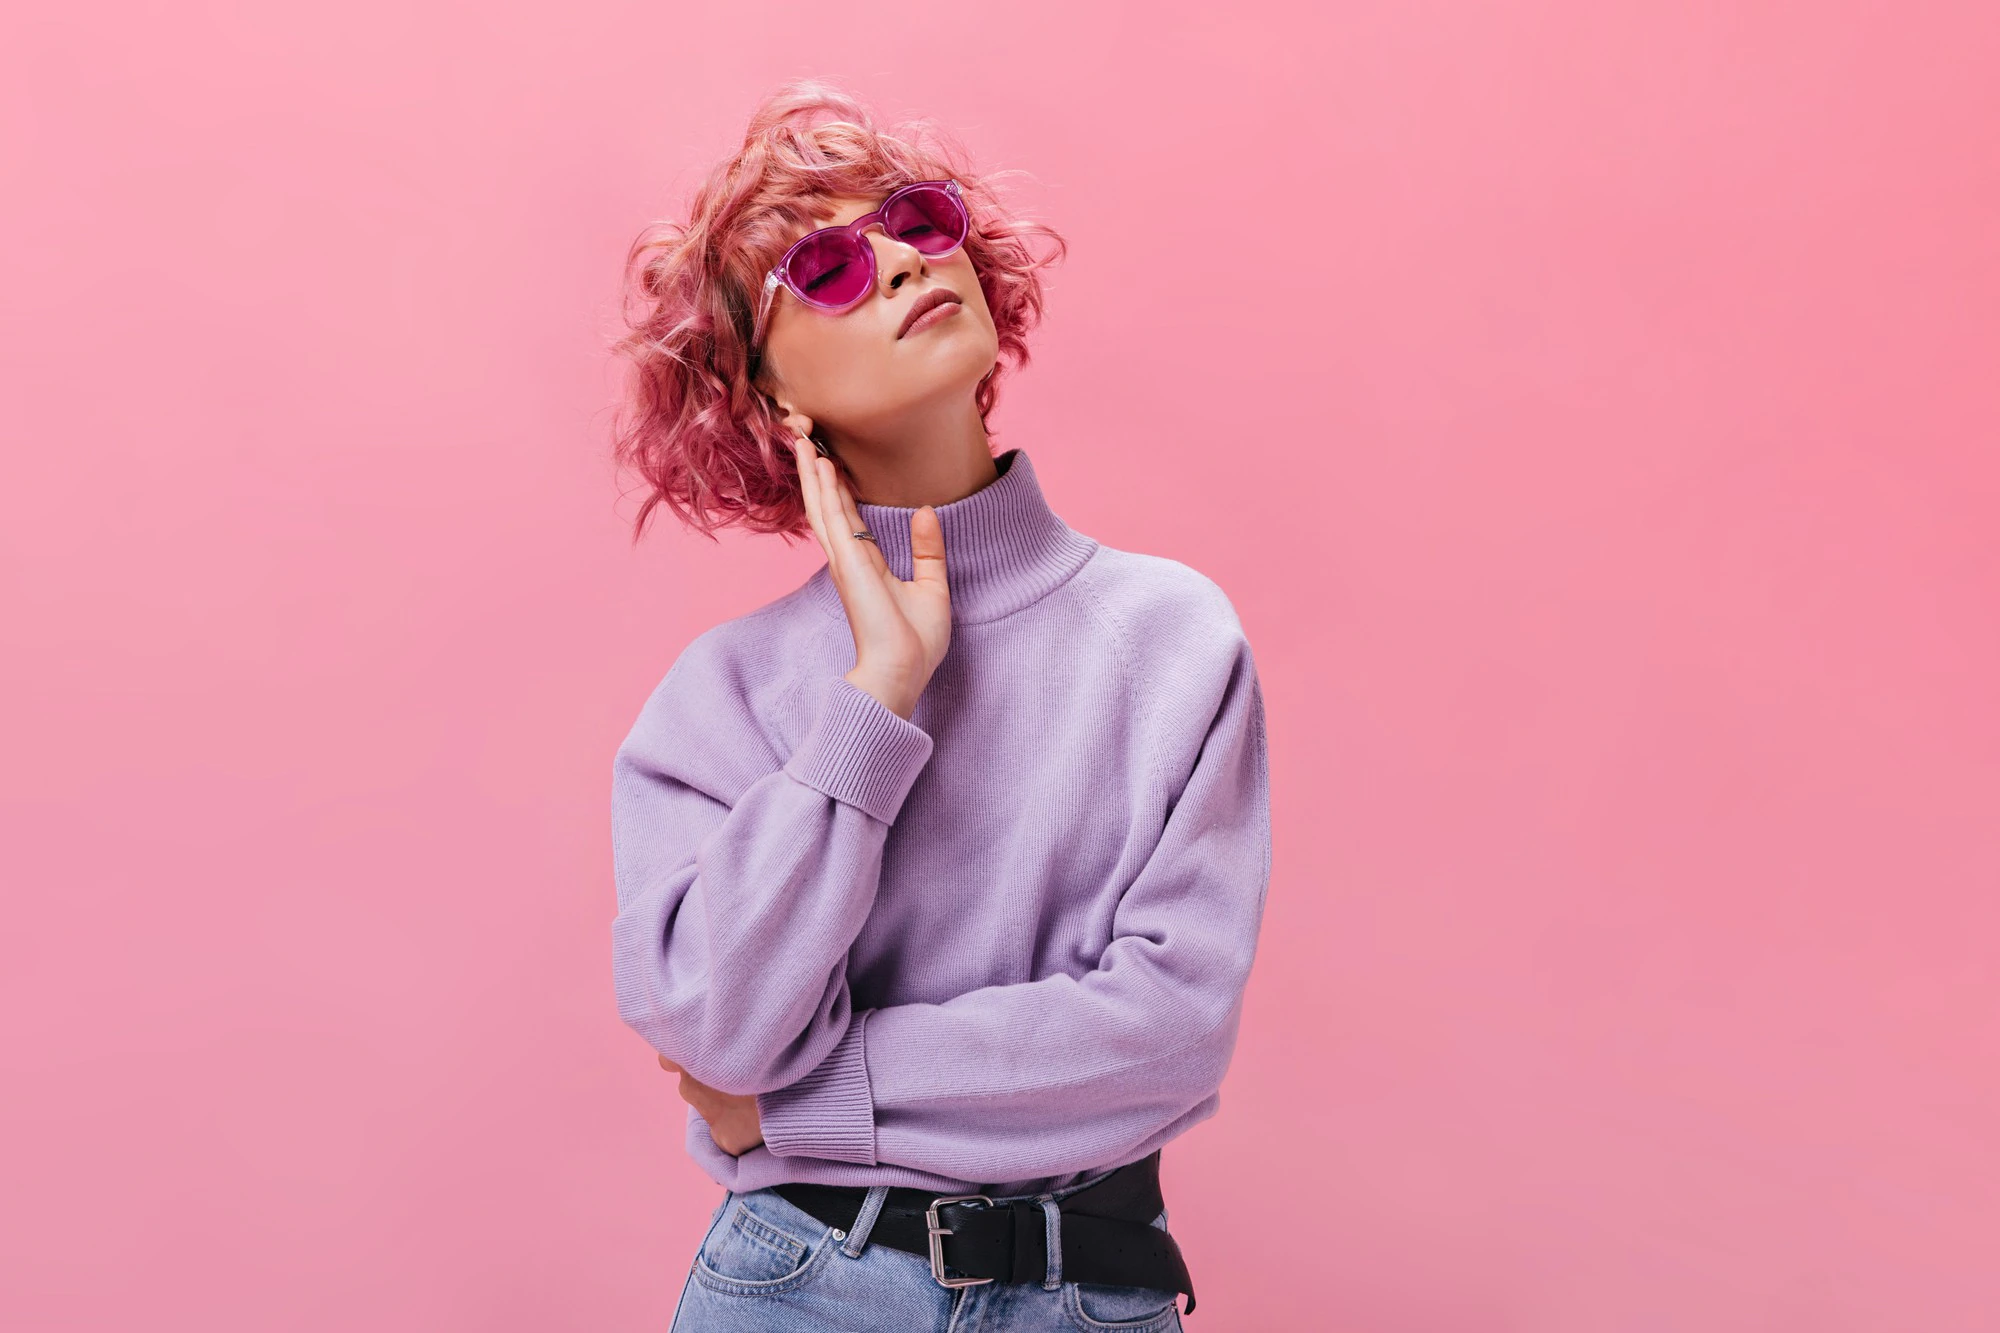 attractive curly woman purple cashmere sweater fuchsia sunglasses poses isolated wall 197531 24158